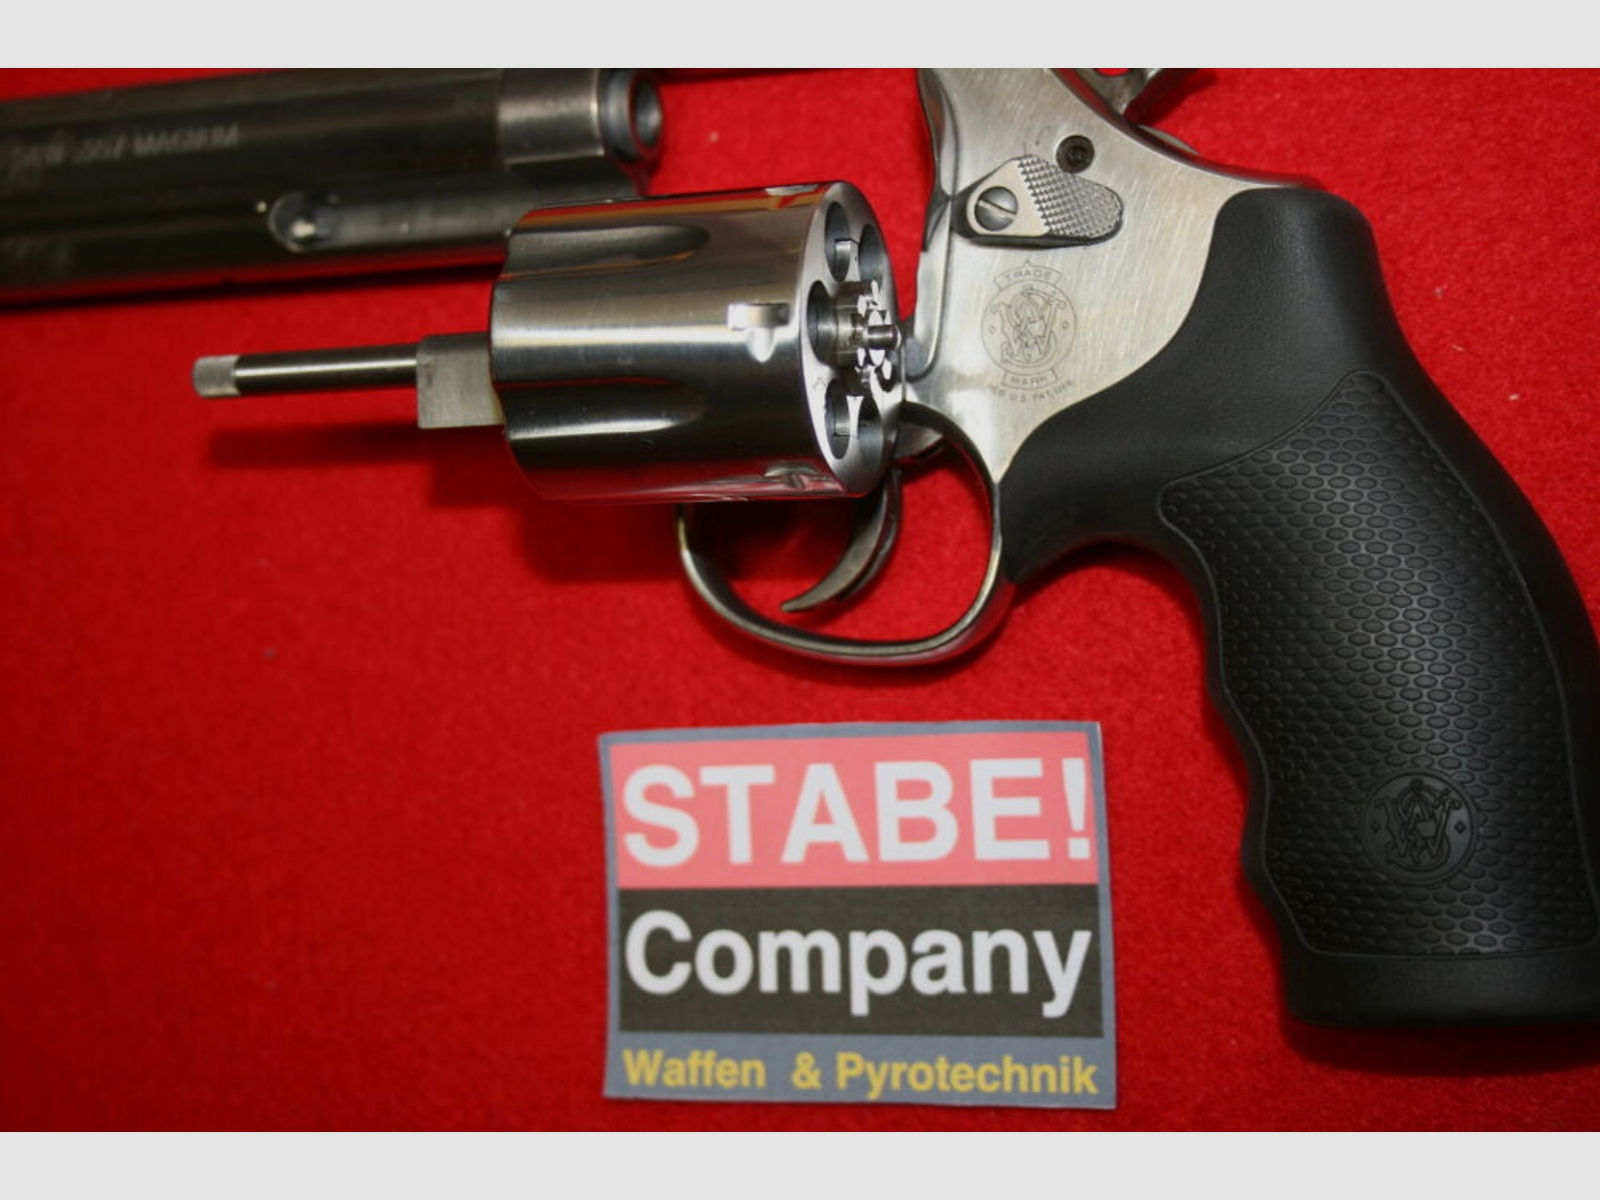 Smith & Wesson	 686-6